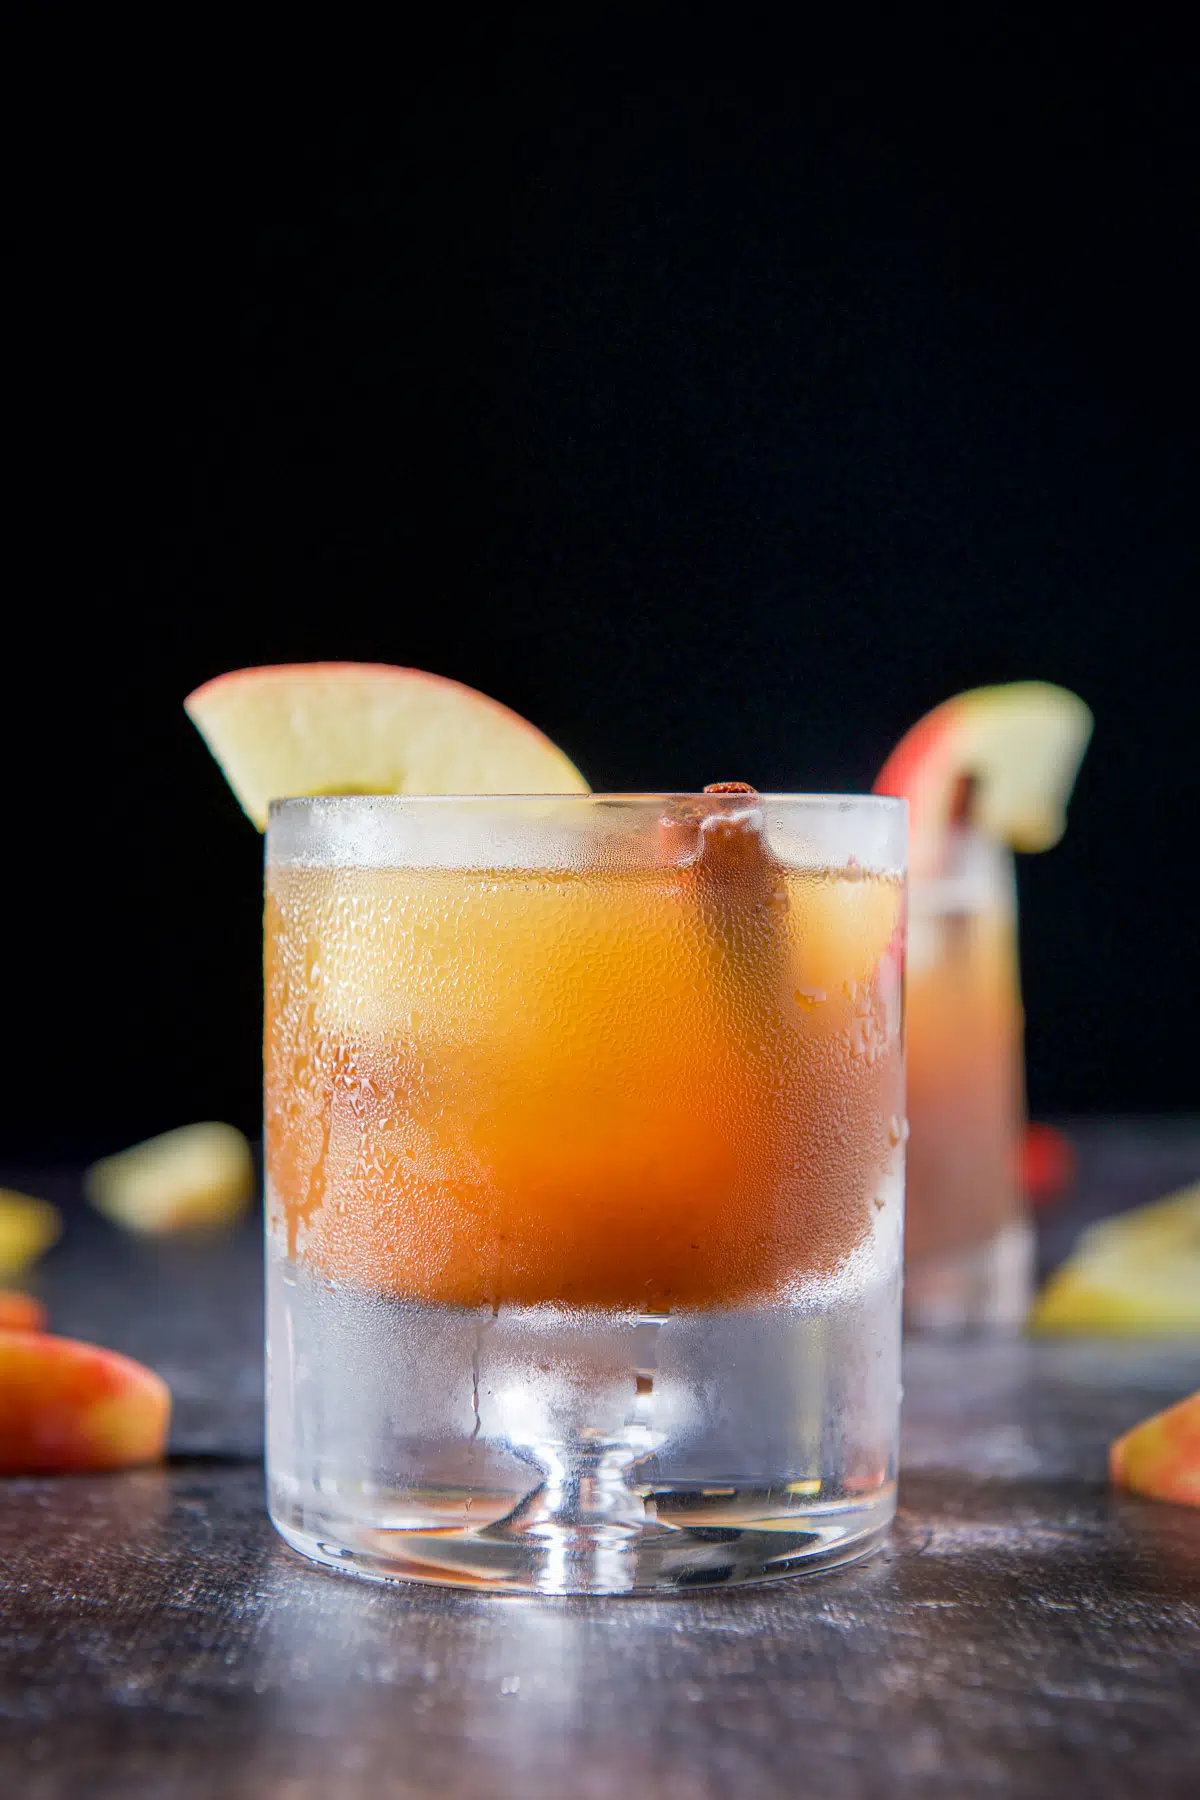 Vertical view of the heavy bottomed glass with the apple cocktail with apple slices and cinnamon stick